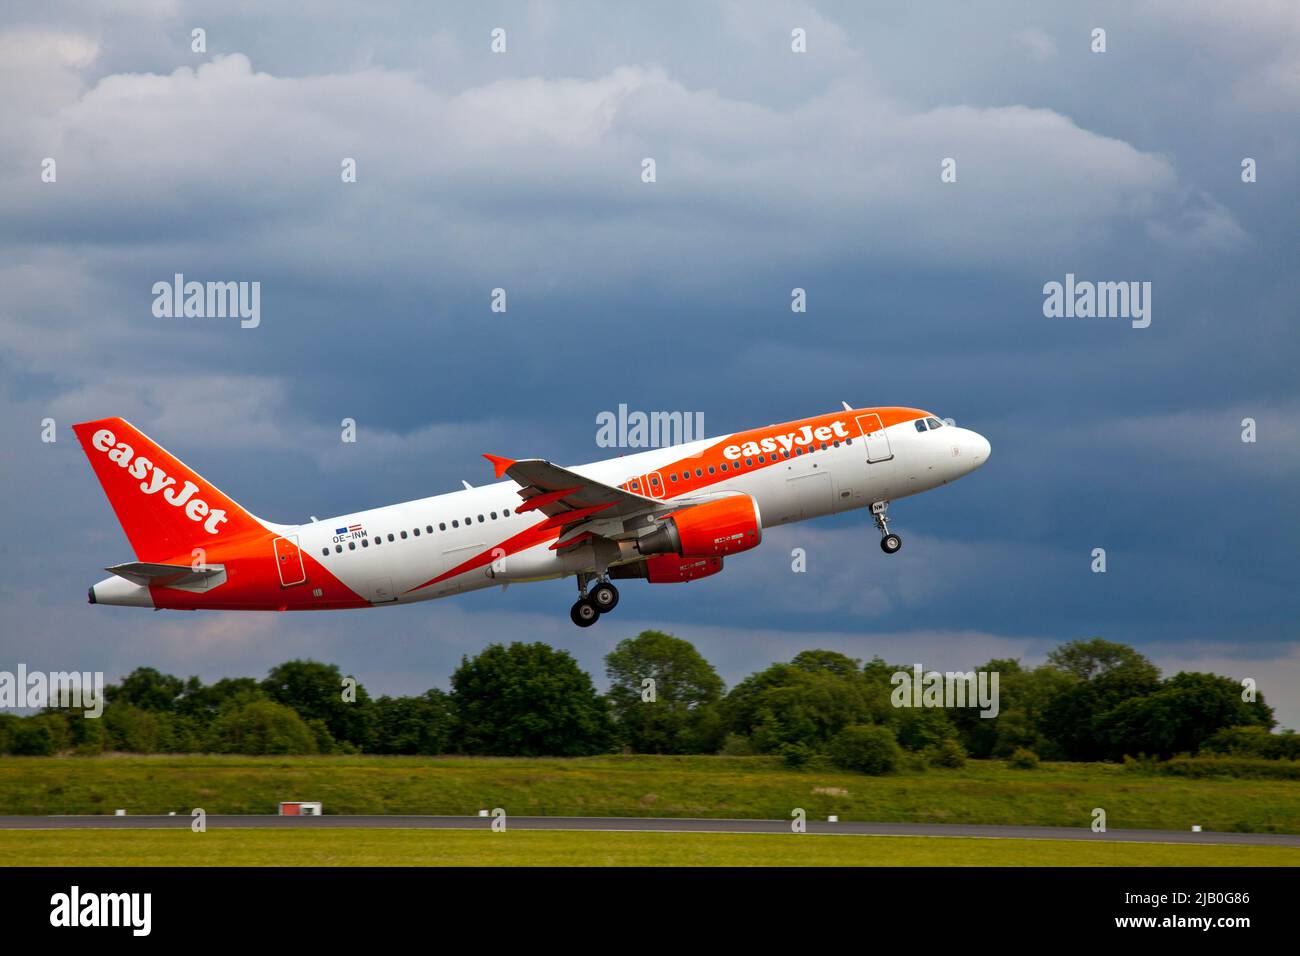 Easy jet plane taking off at Manchester Airport Stock Photo